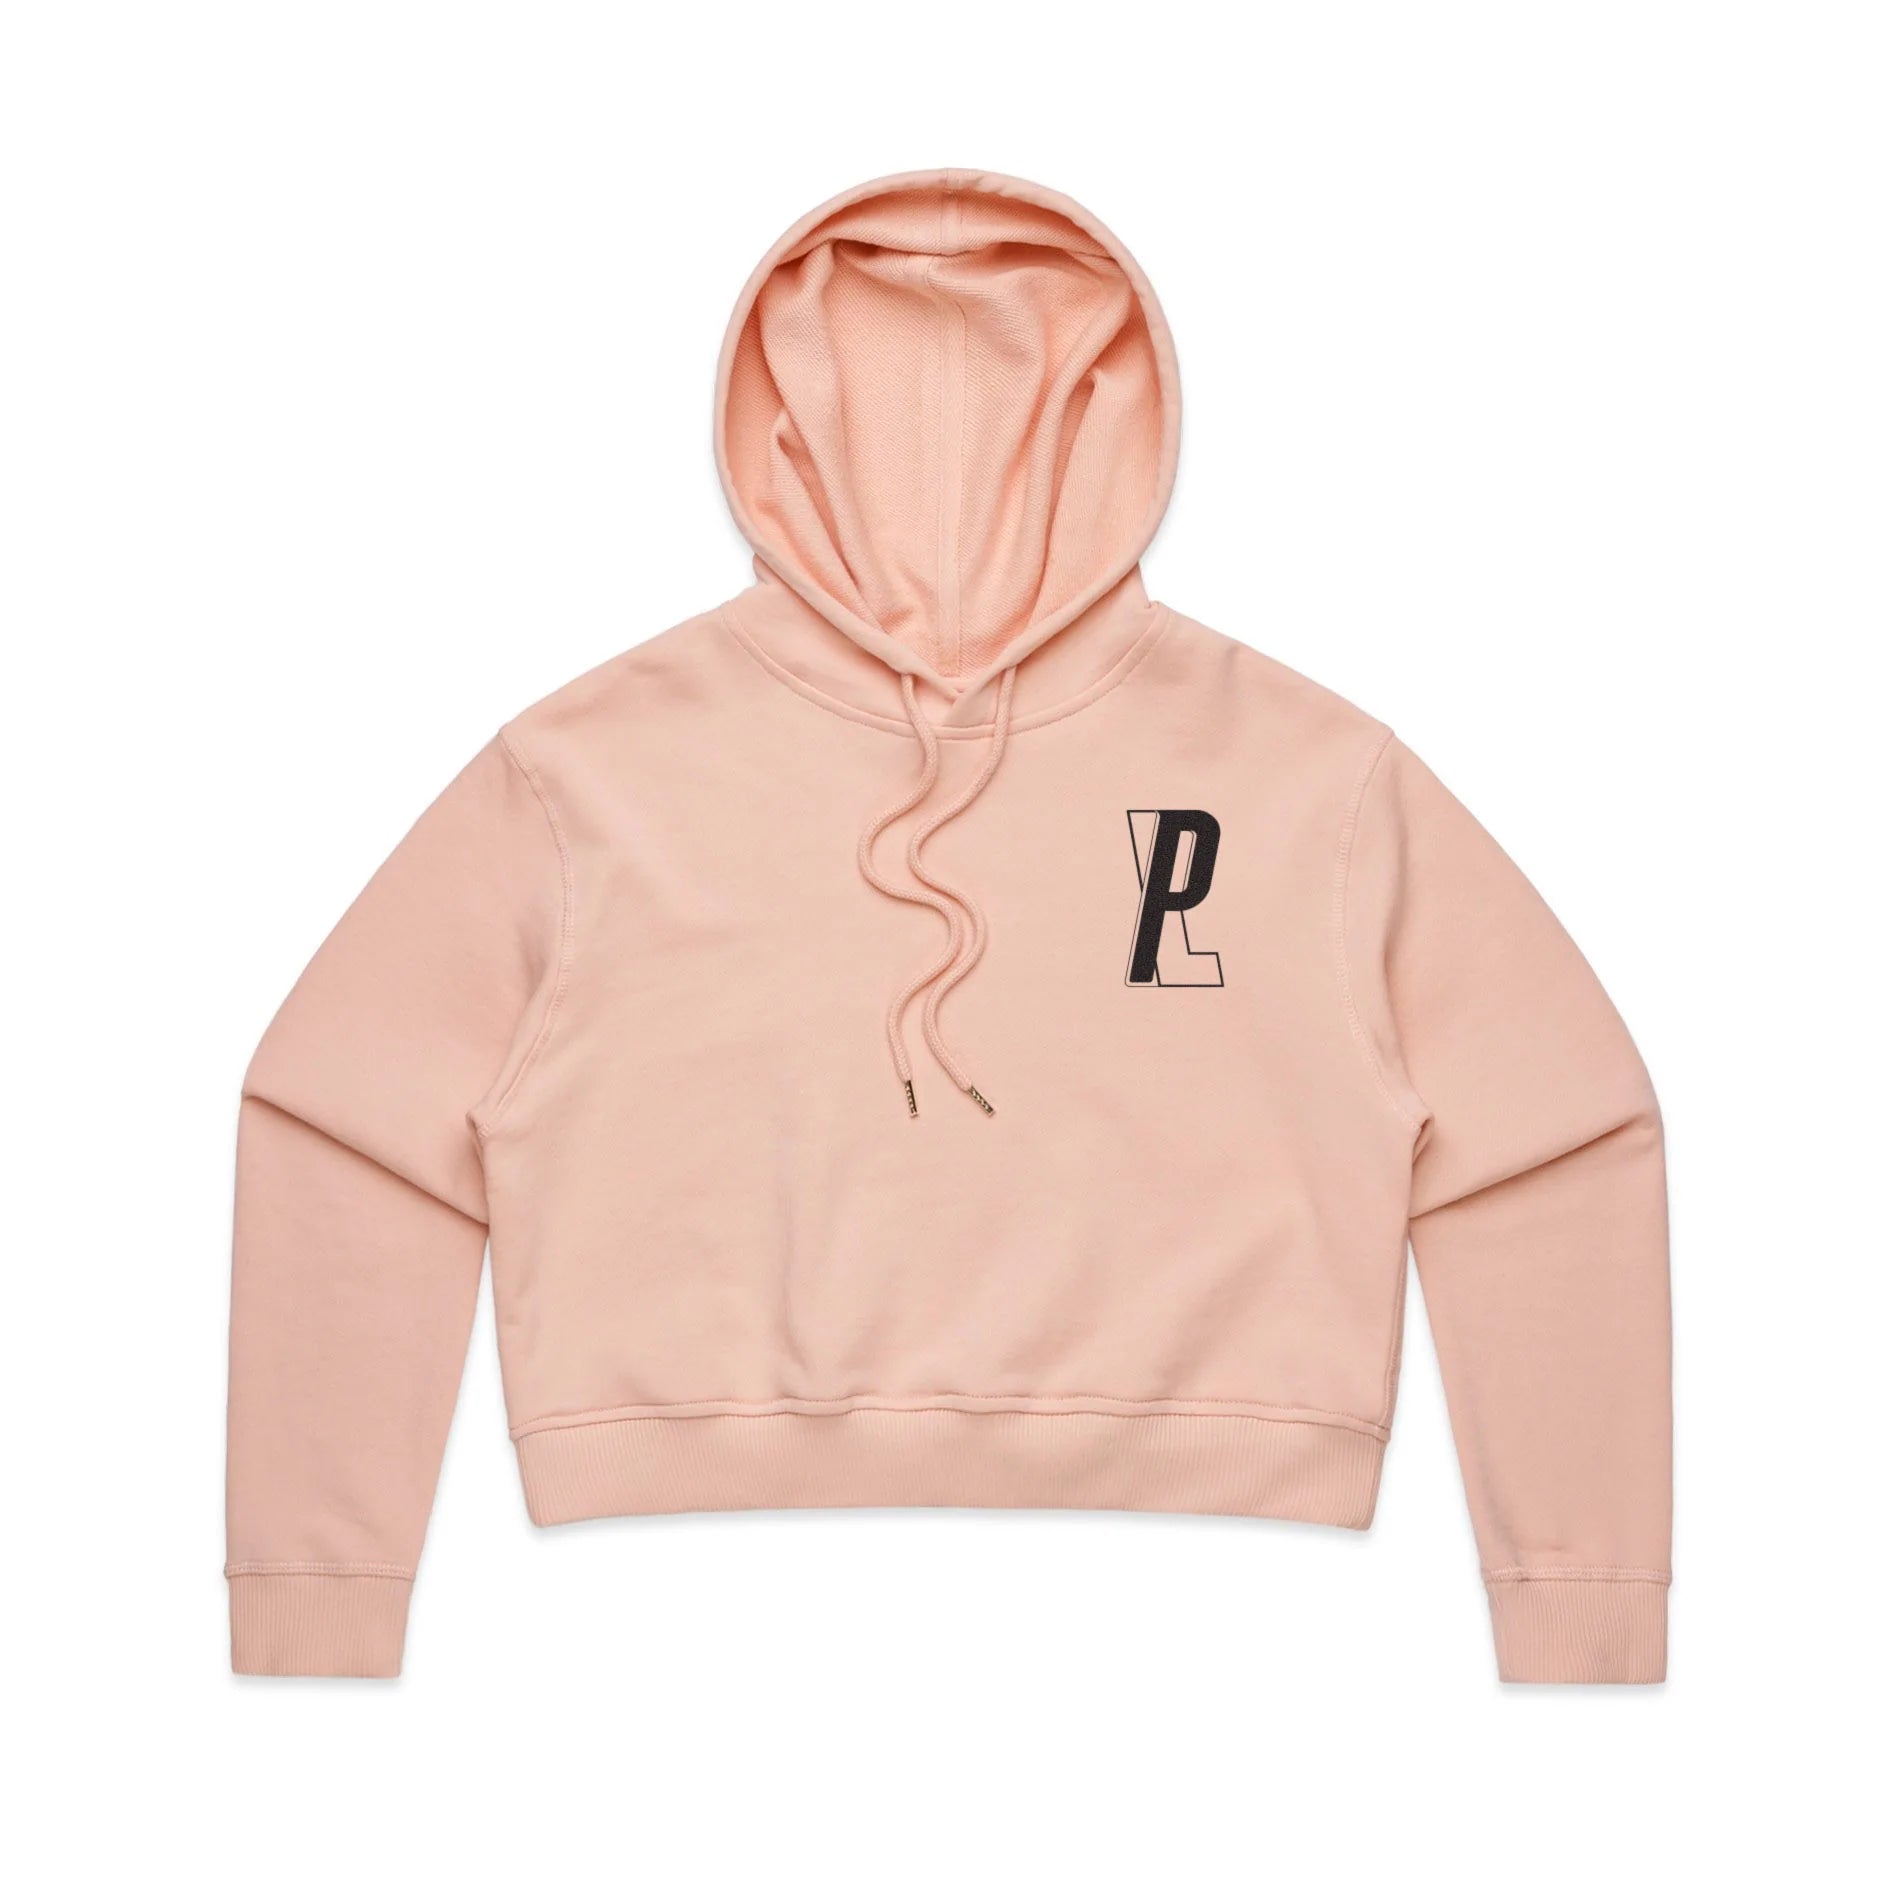 PIRATE LIFE WOMEN'S CROPPED PINK HOODIE